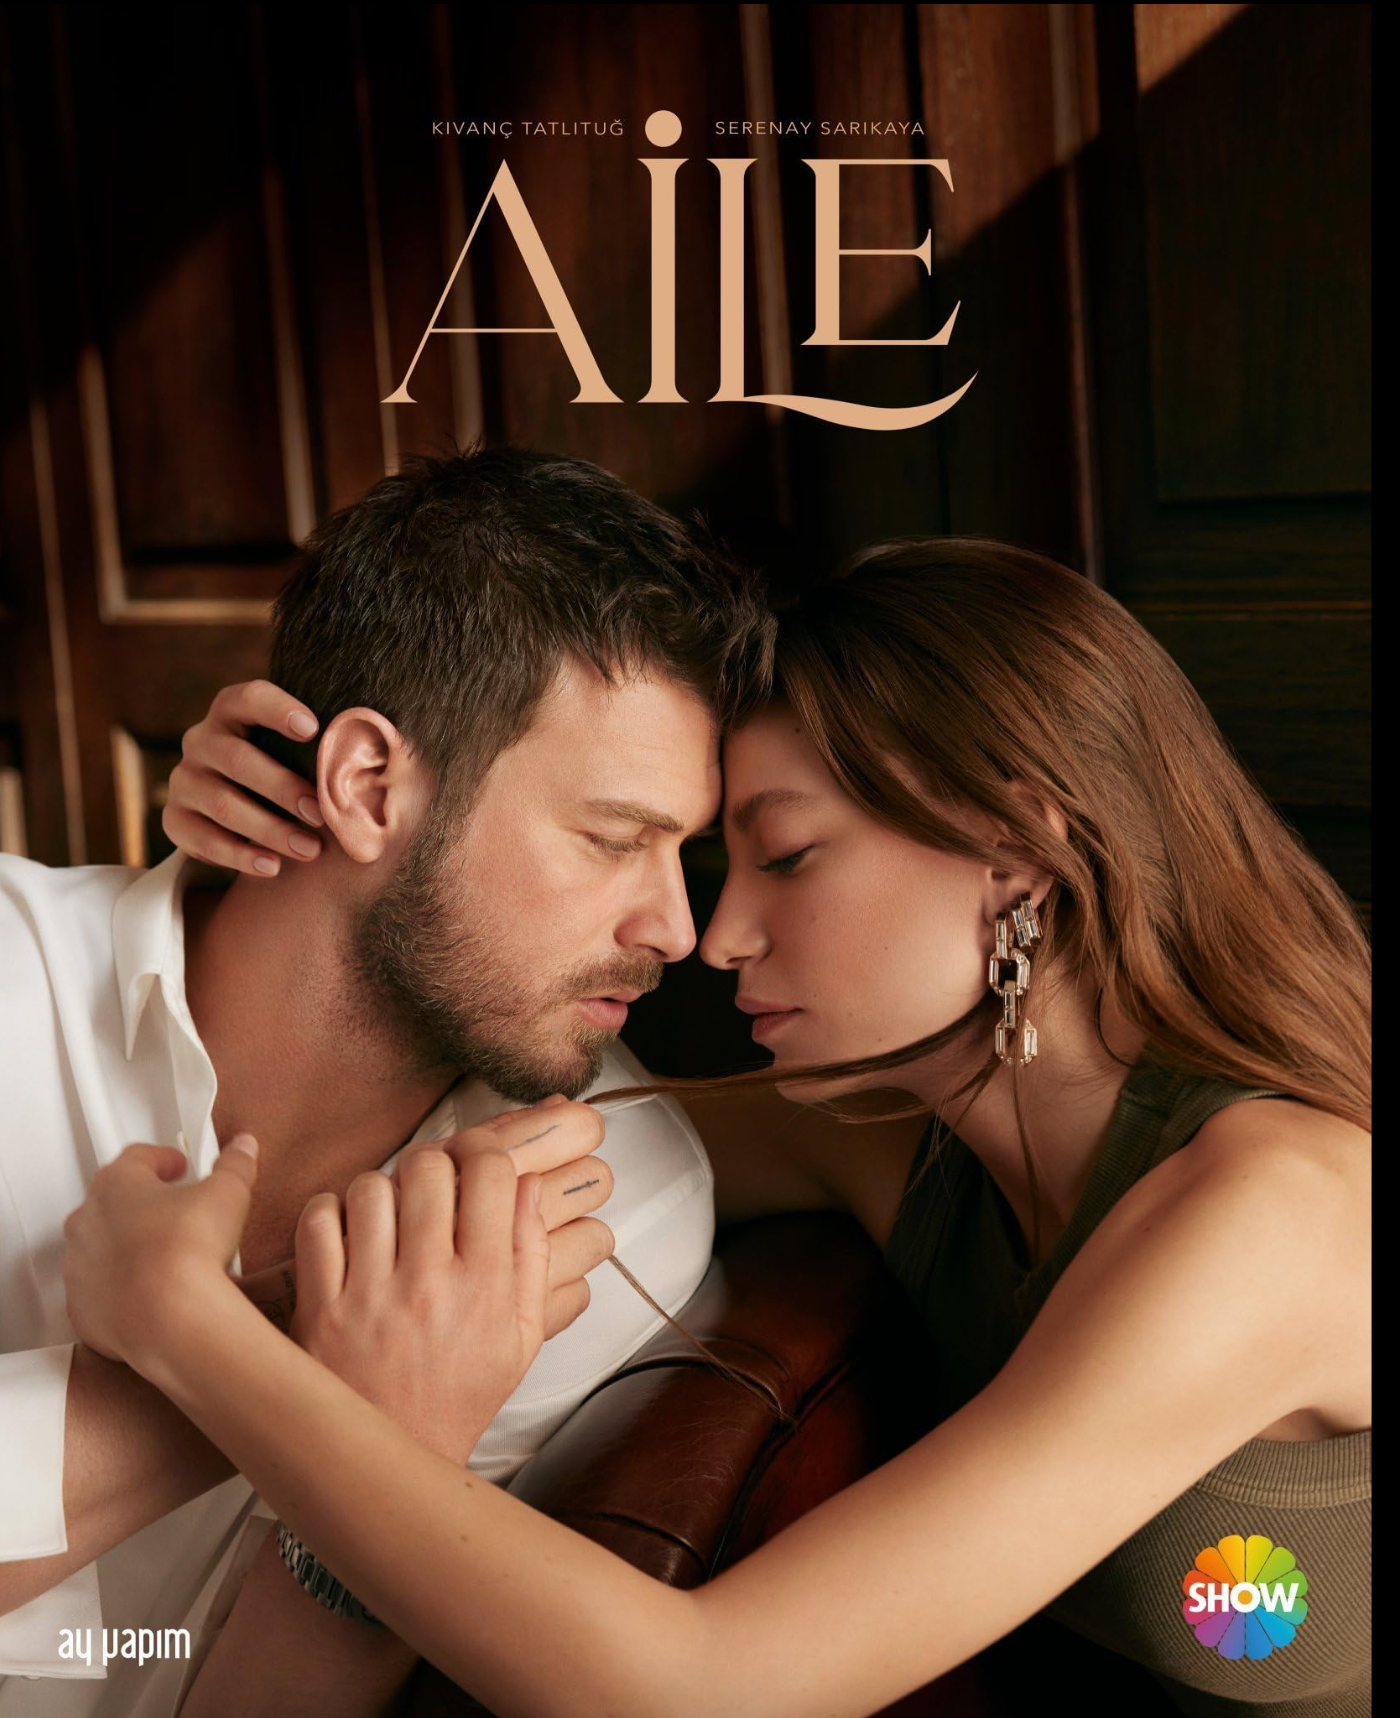 Aile (The Family) Complete Series - All Episodes & Seasons with English Subtitles | Turkish TV Drama Original Voices